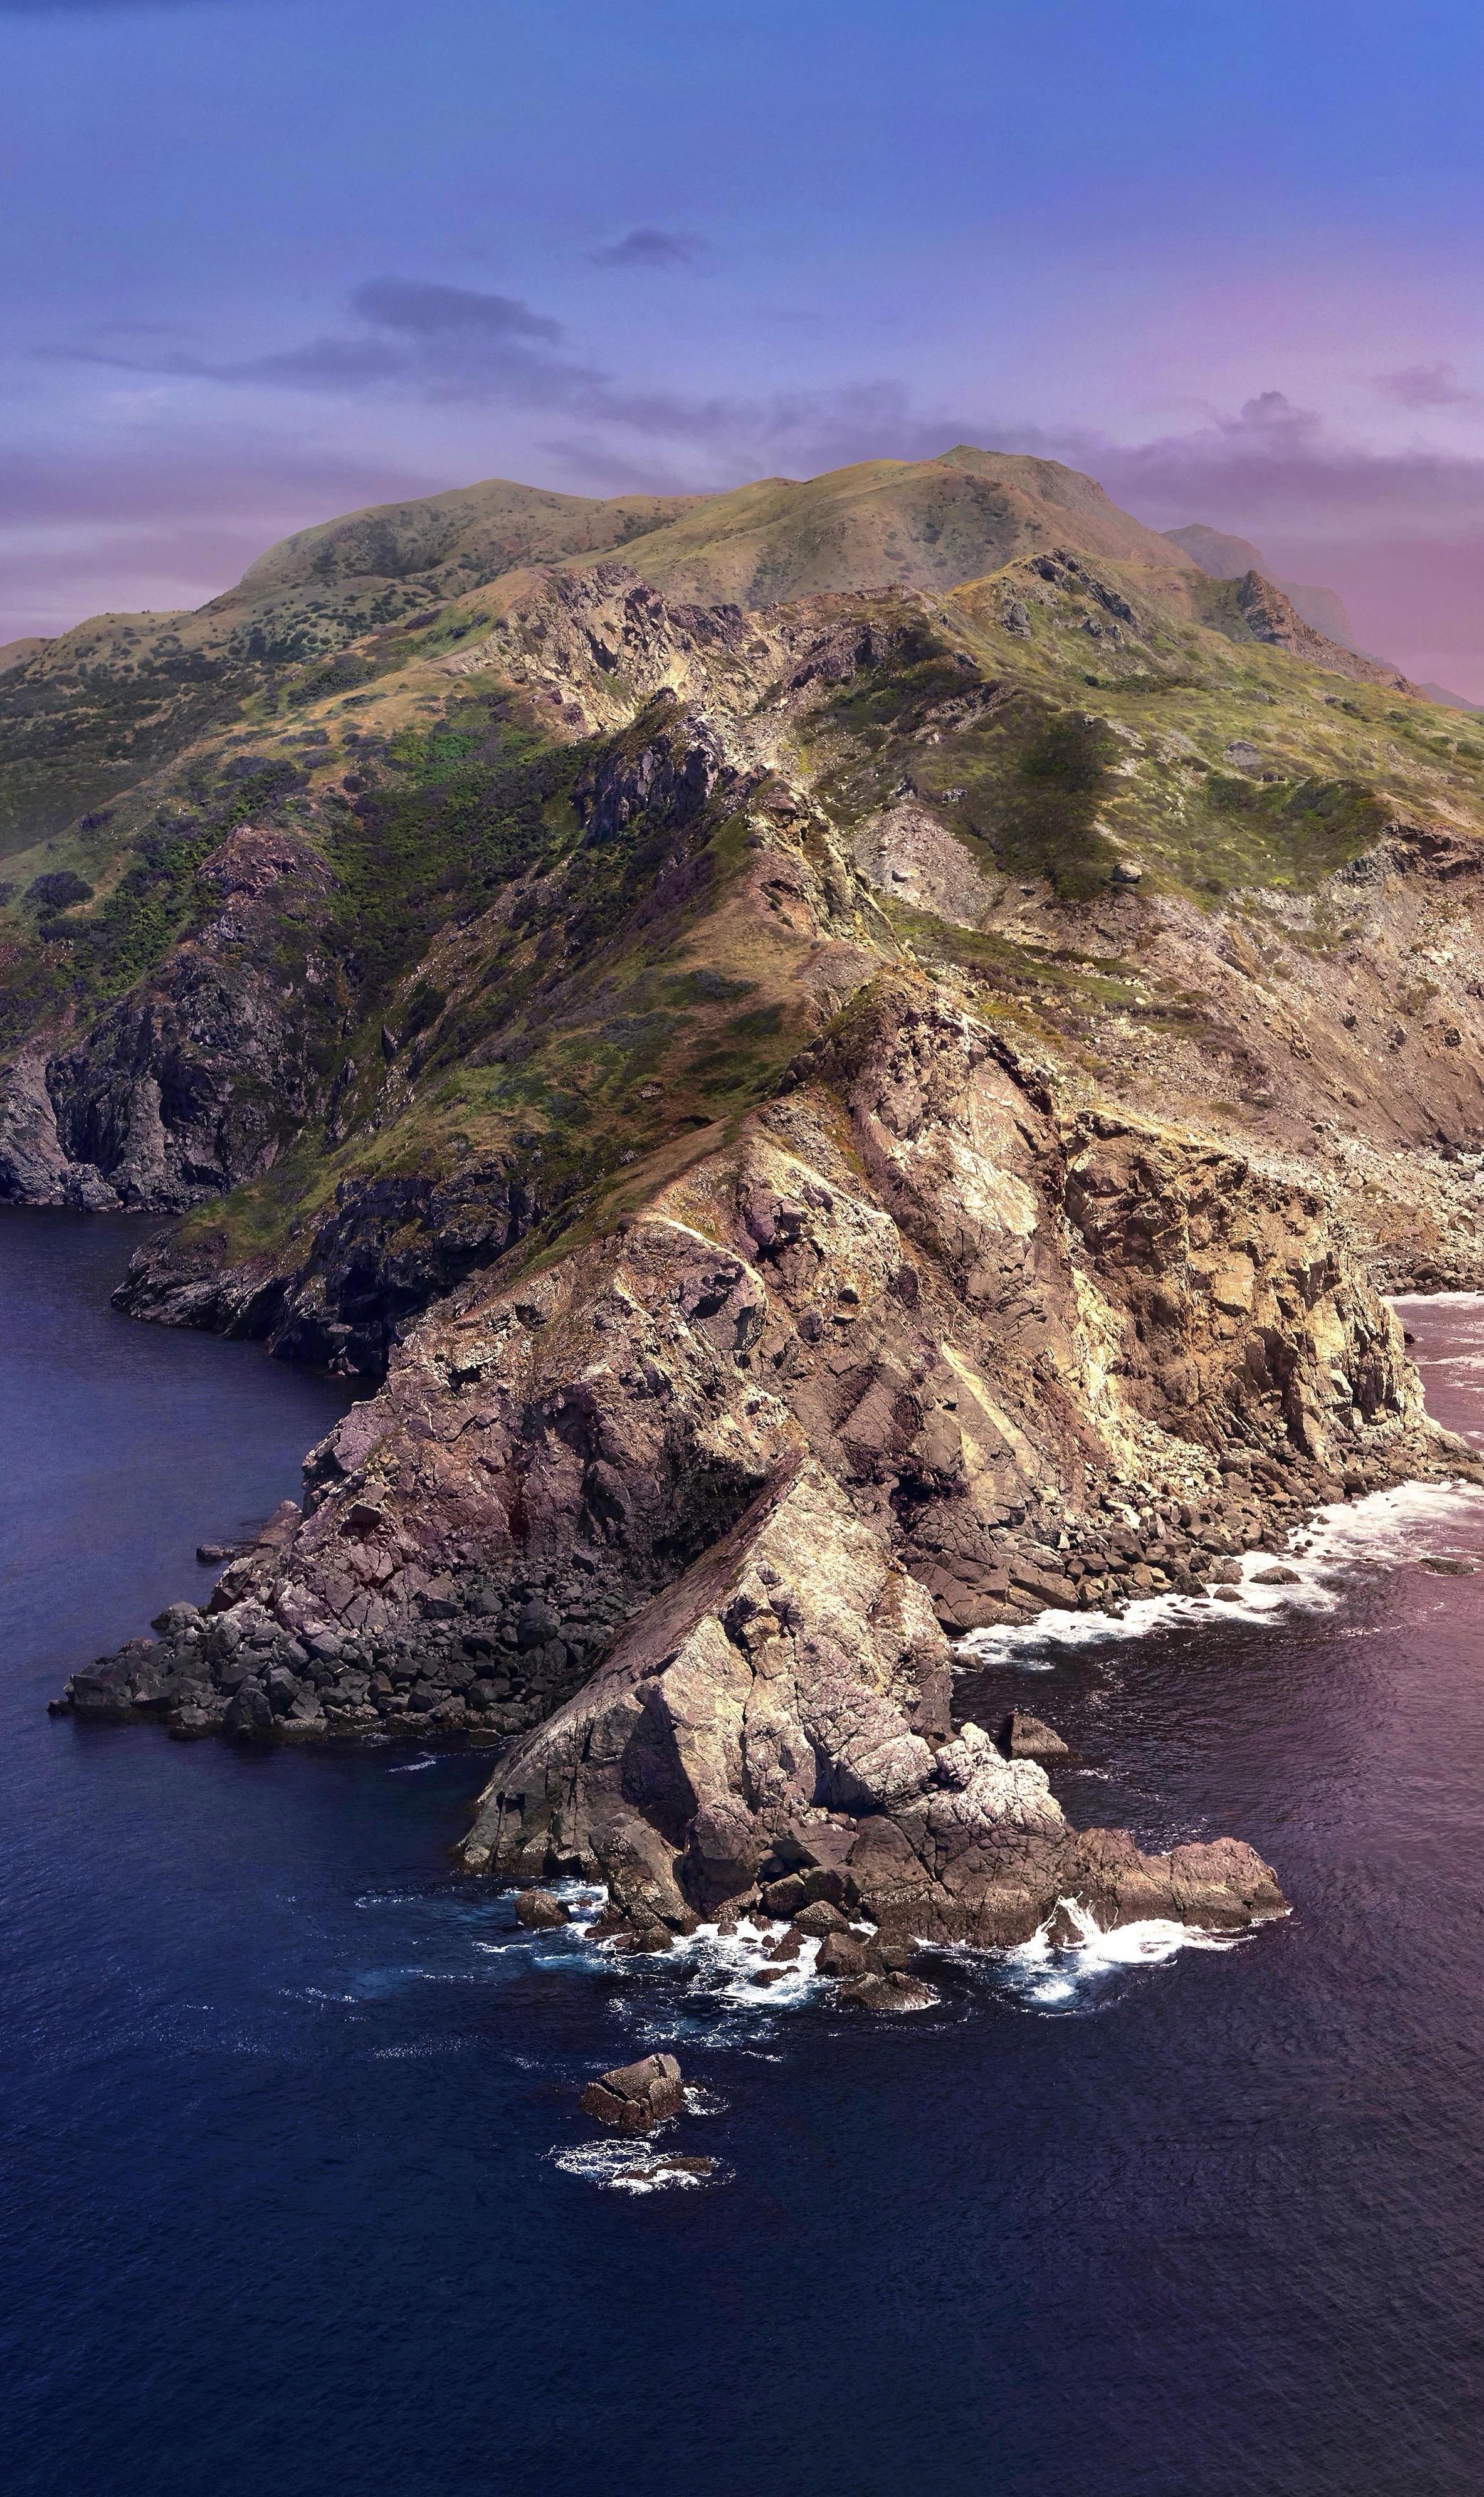 Macos Catalina Early Morning Wallpaper For iPhone Or Android